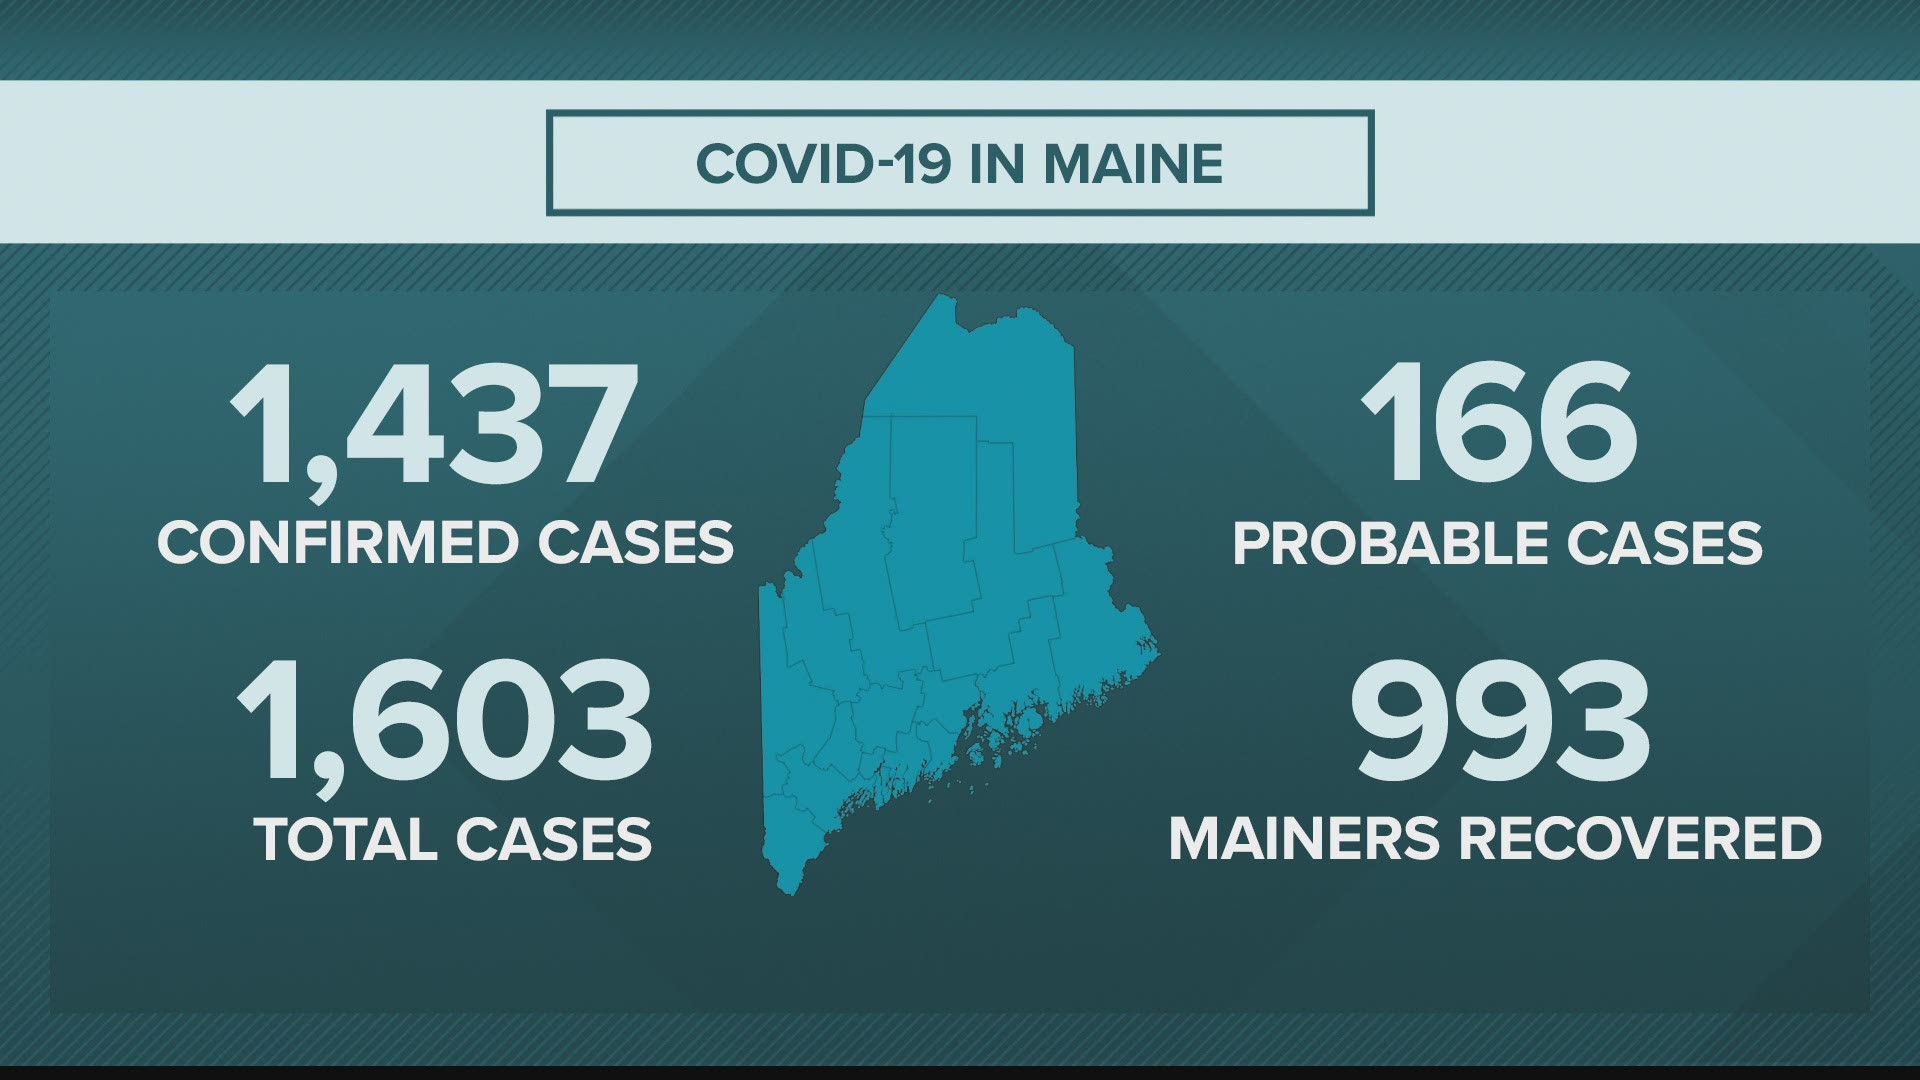 Maine CDC coronavirus, COVID-19 updates for Friday, May 15: 1,603 total cases, 69 deaths